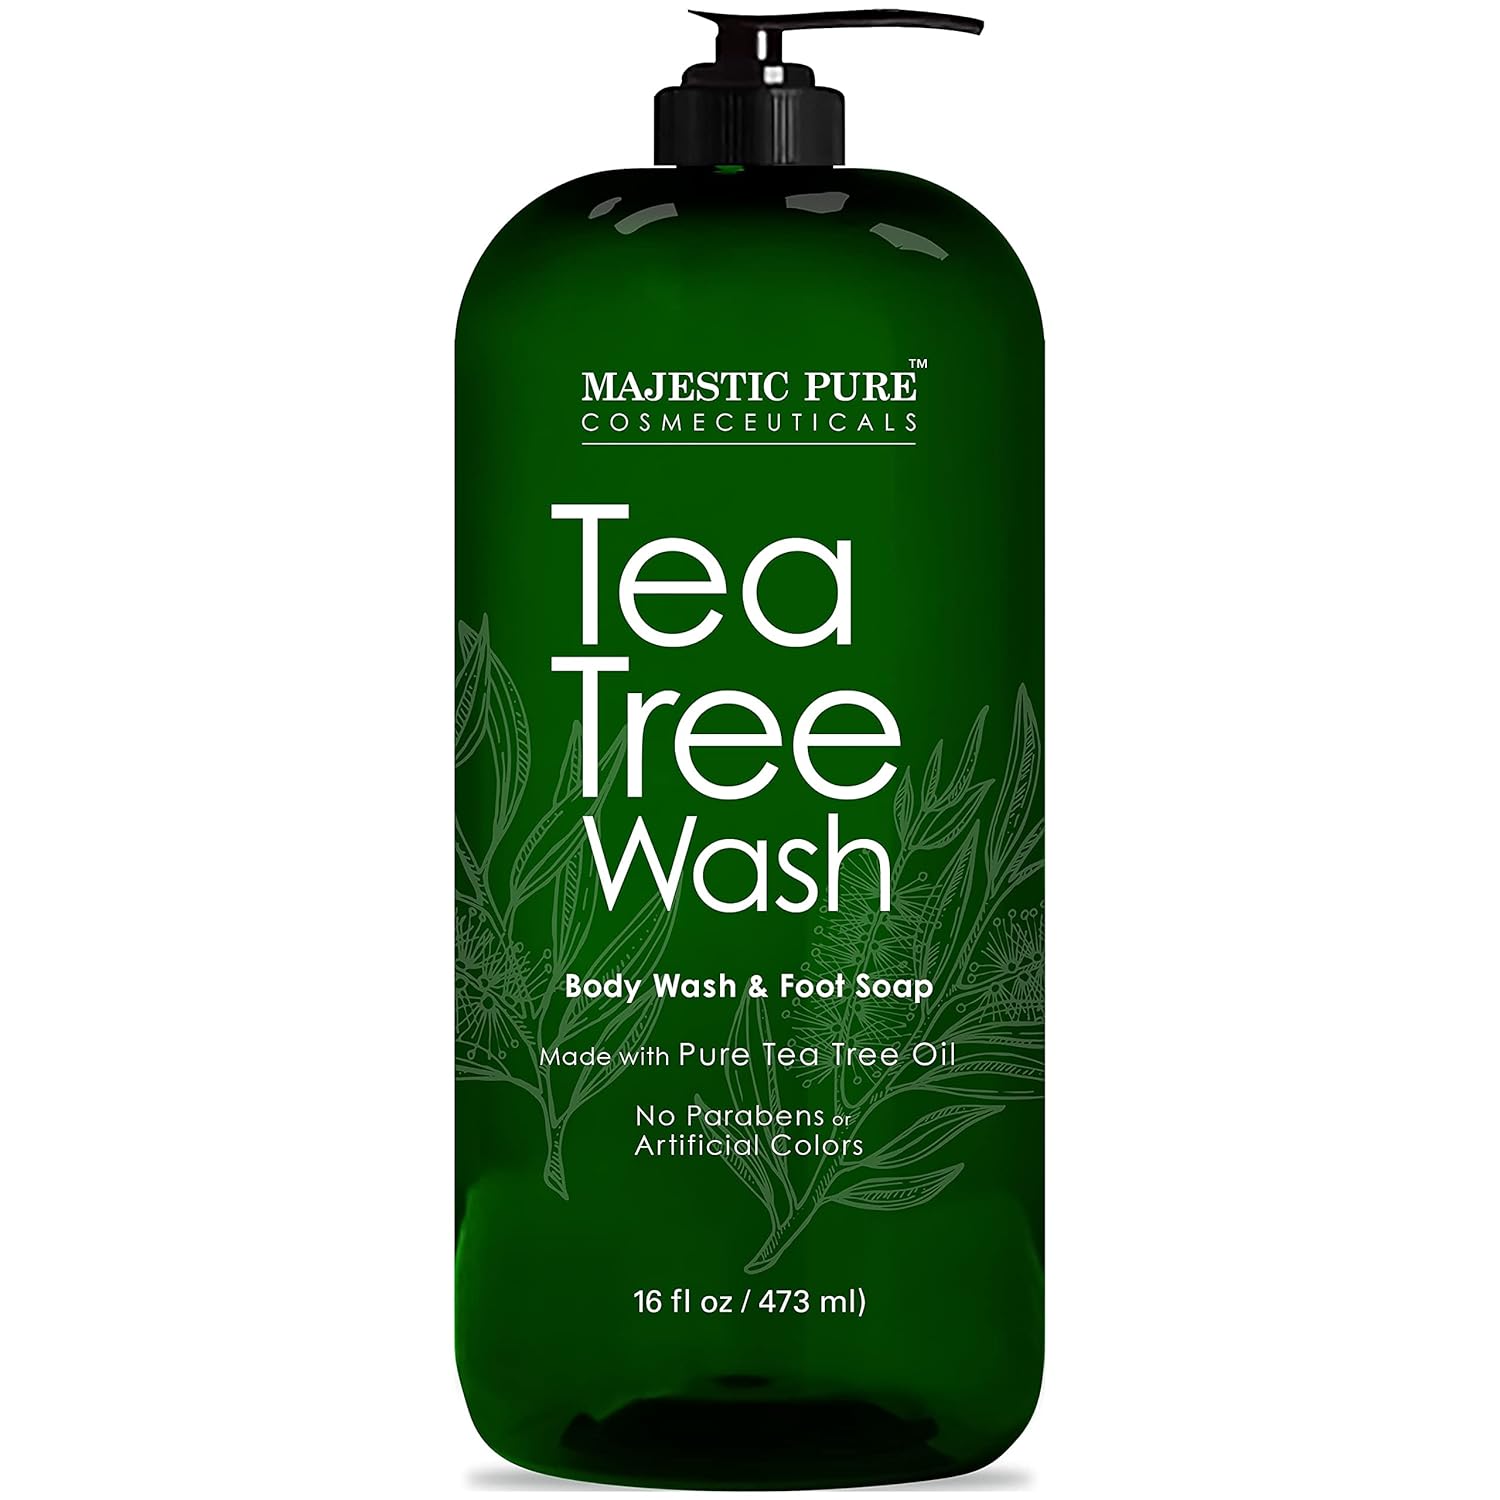 MAJESTIC PURE Tea Tree Body Wash - Formulated to Combat Dry, Flaky Skin - Soothes, Nourishes and Moisturizes Irritated, Chapped, Problem Skin Areas - (Packaging may Vary) -16 fl. oz